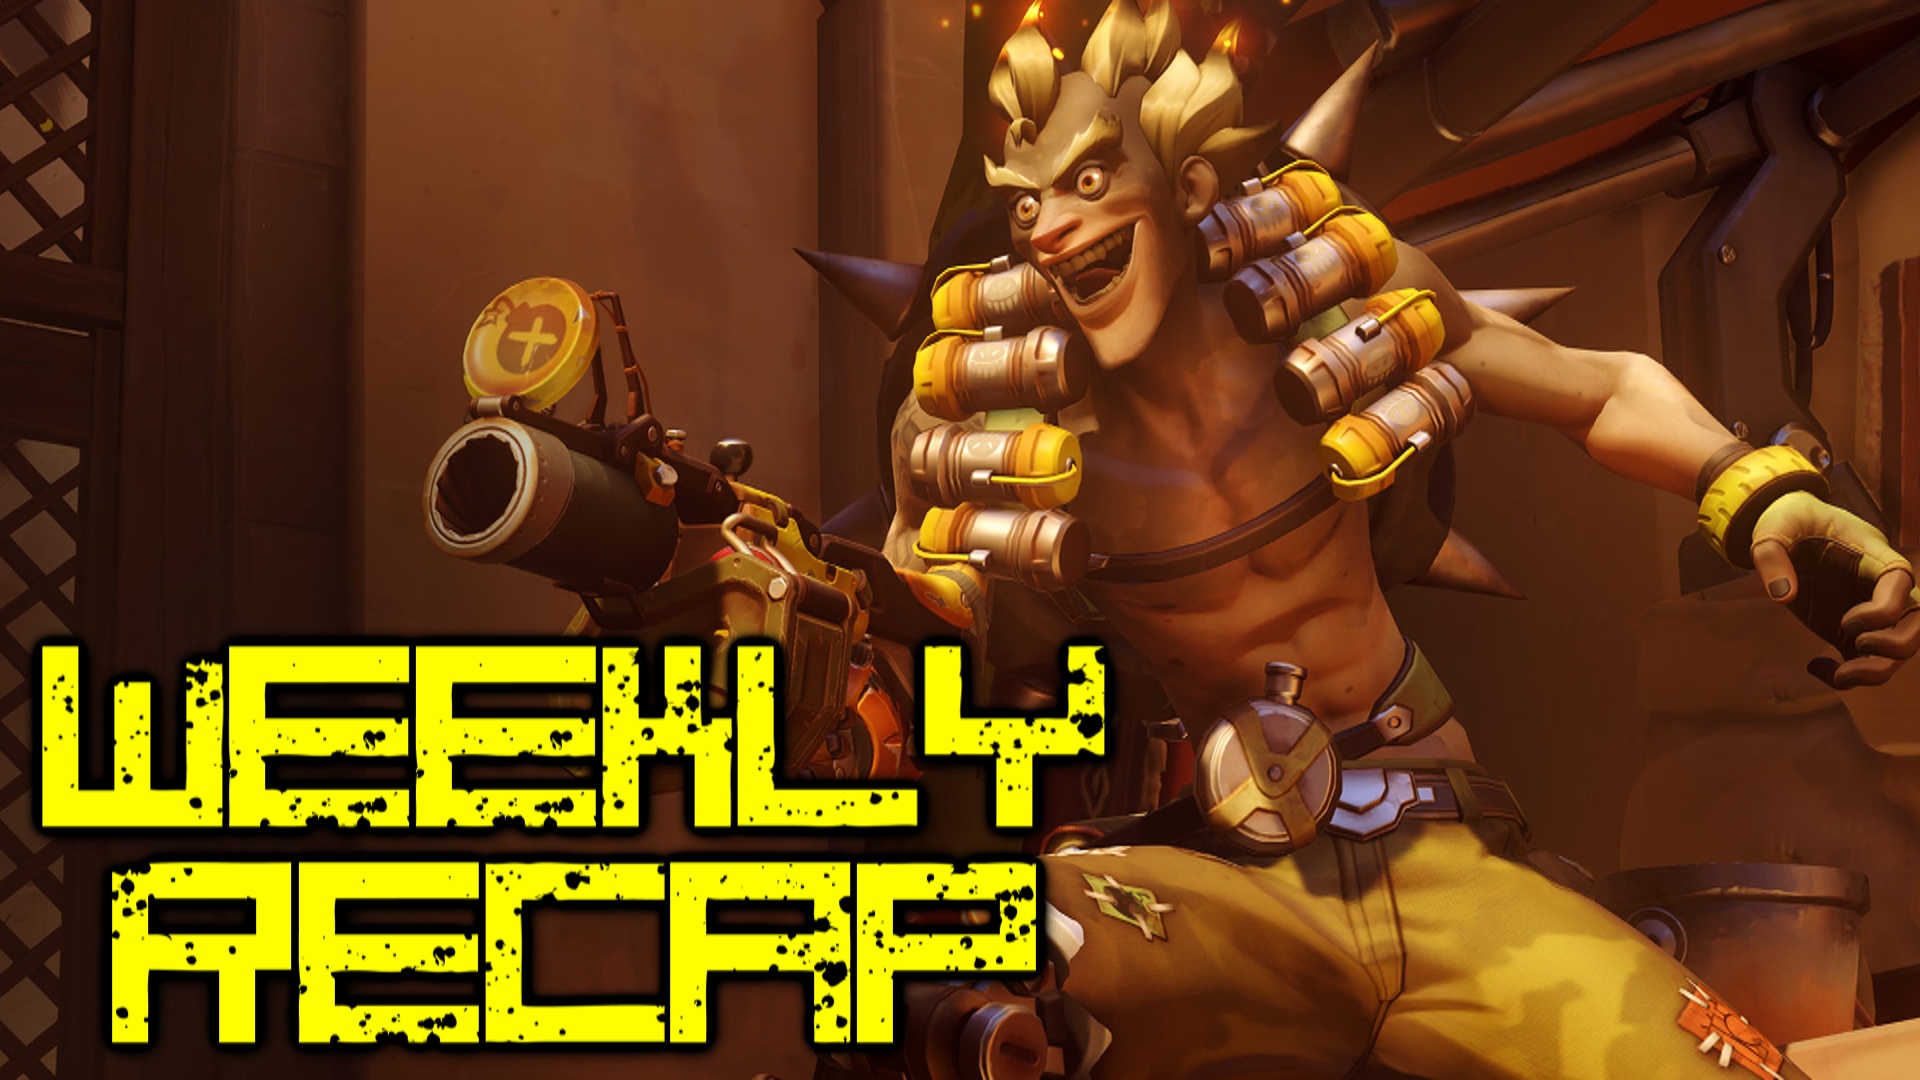 MMOHuts Weekly Recap #258 Sept. 28th - Overwatch, Wildstar, Albion & More!